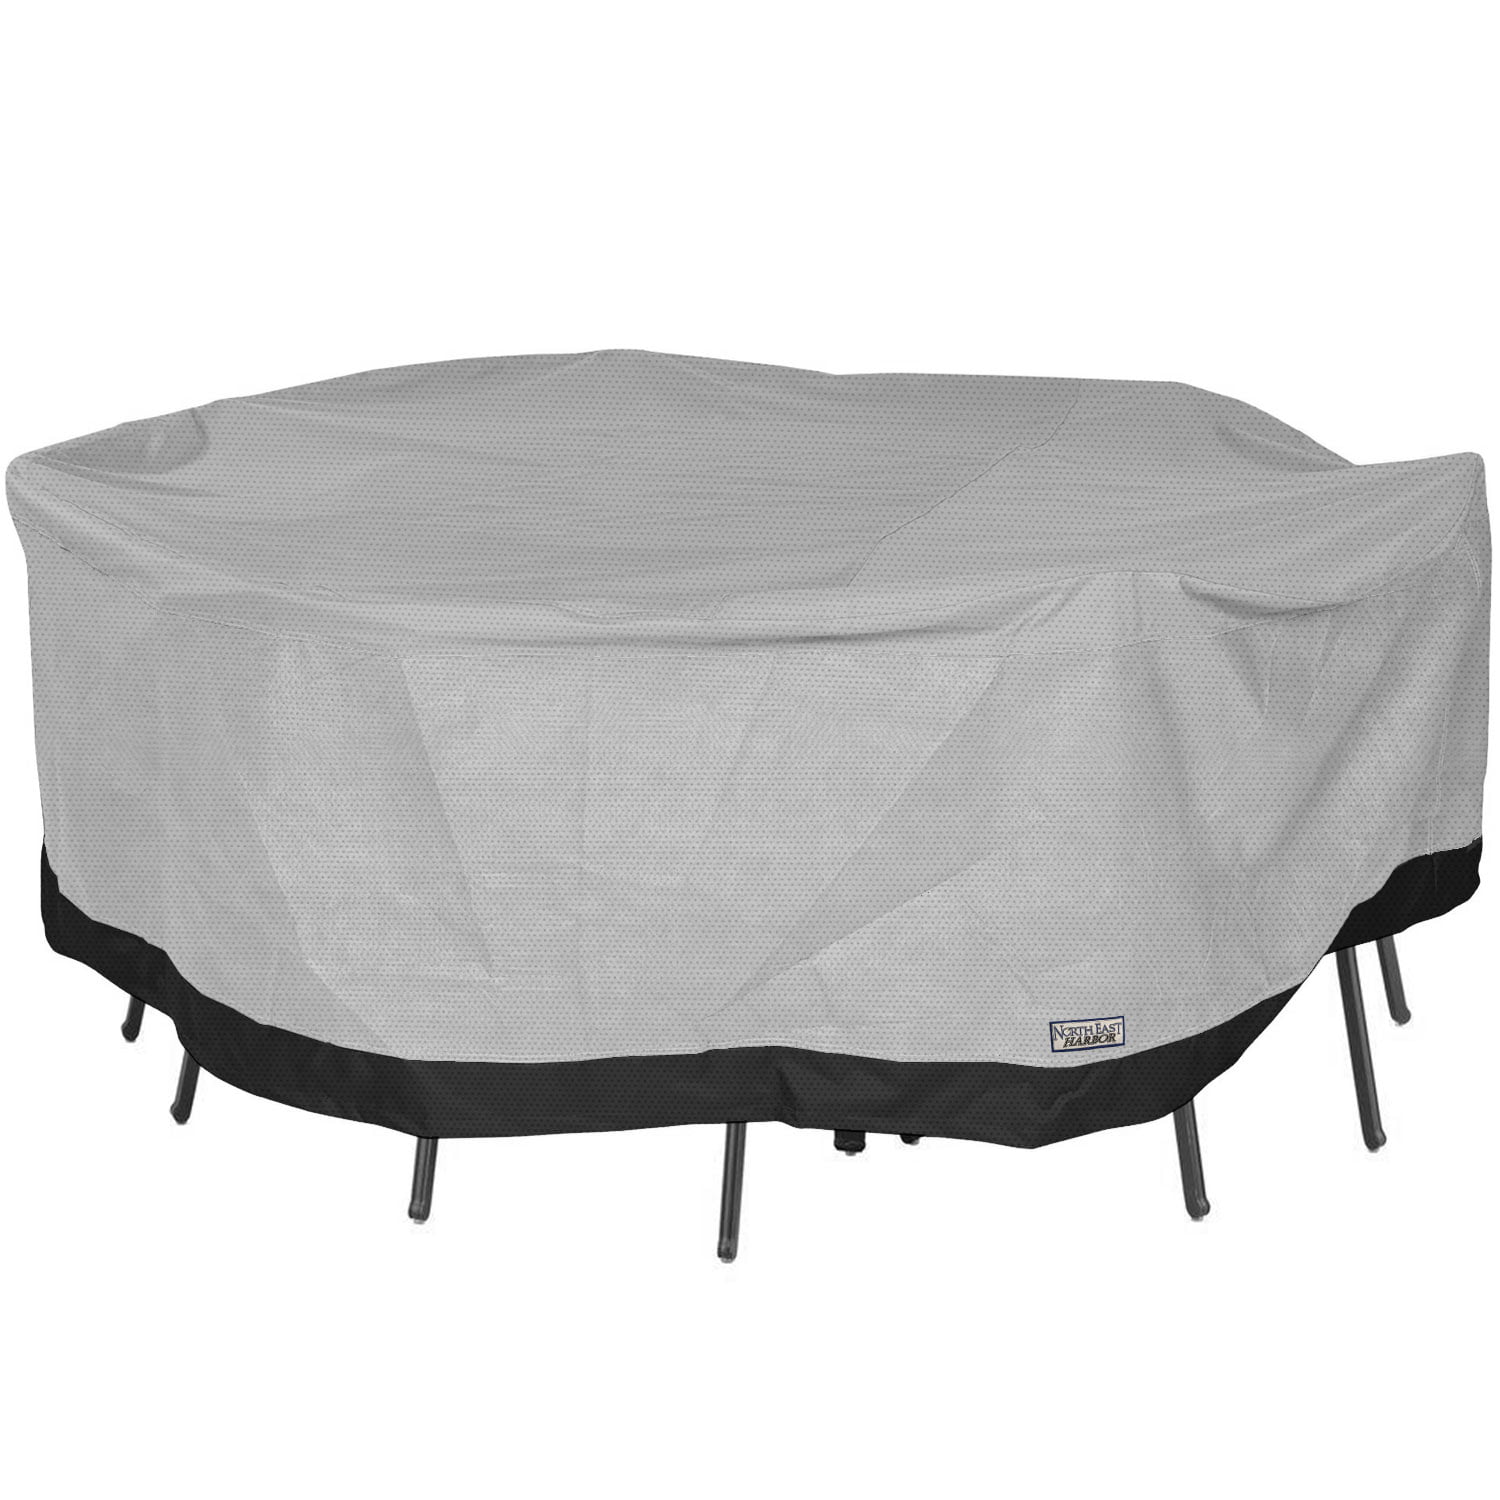 Round Patio Table and Chair Set Outdoor Furniture Cover - 108" Diameter